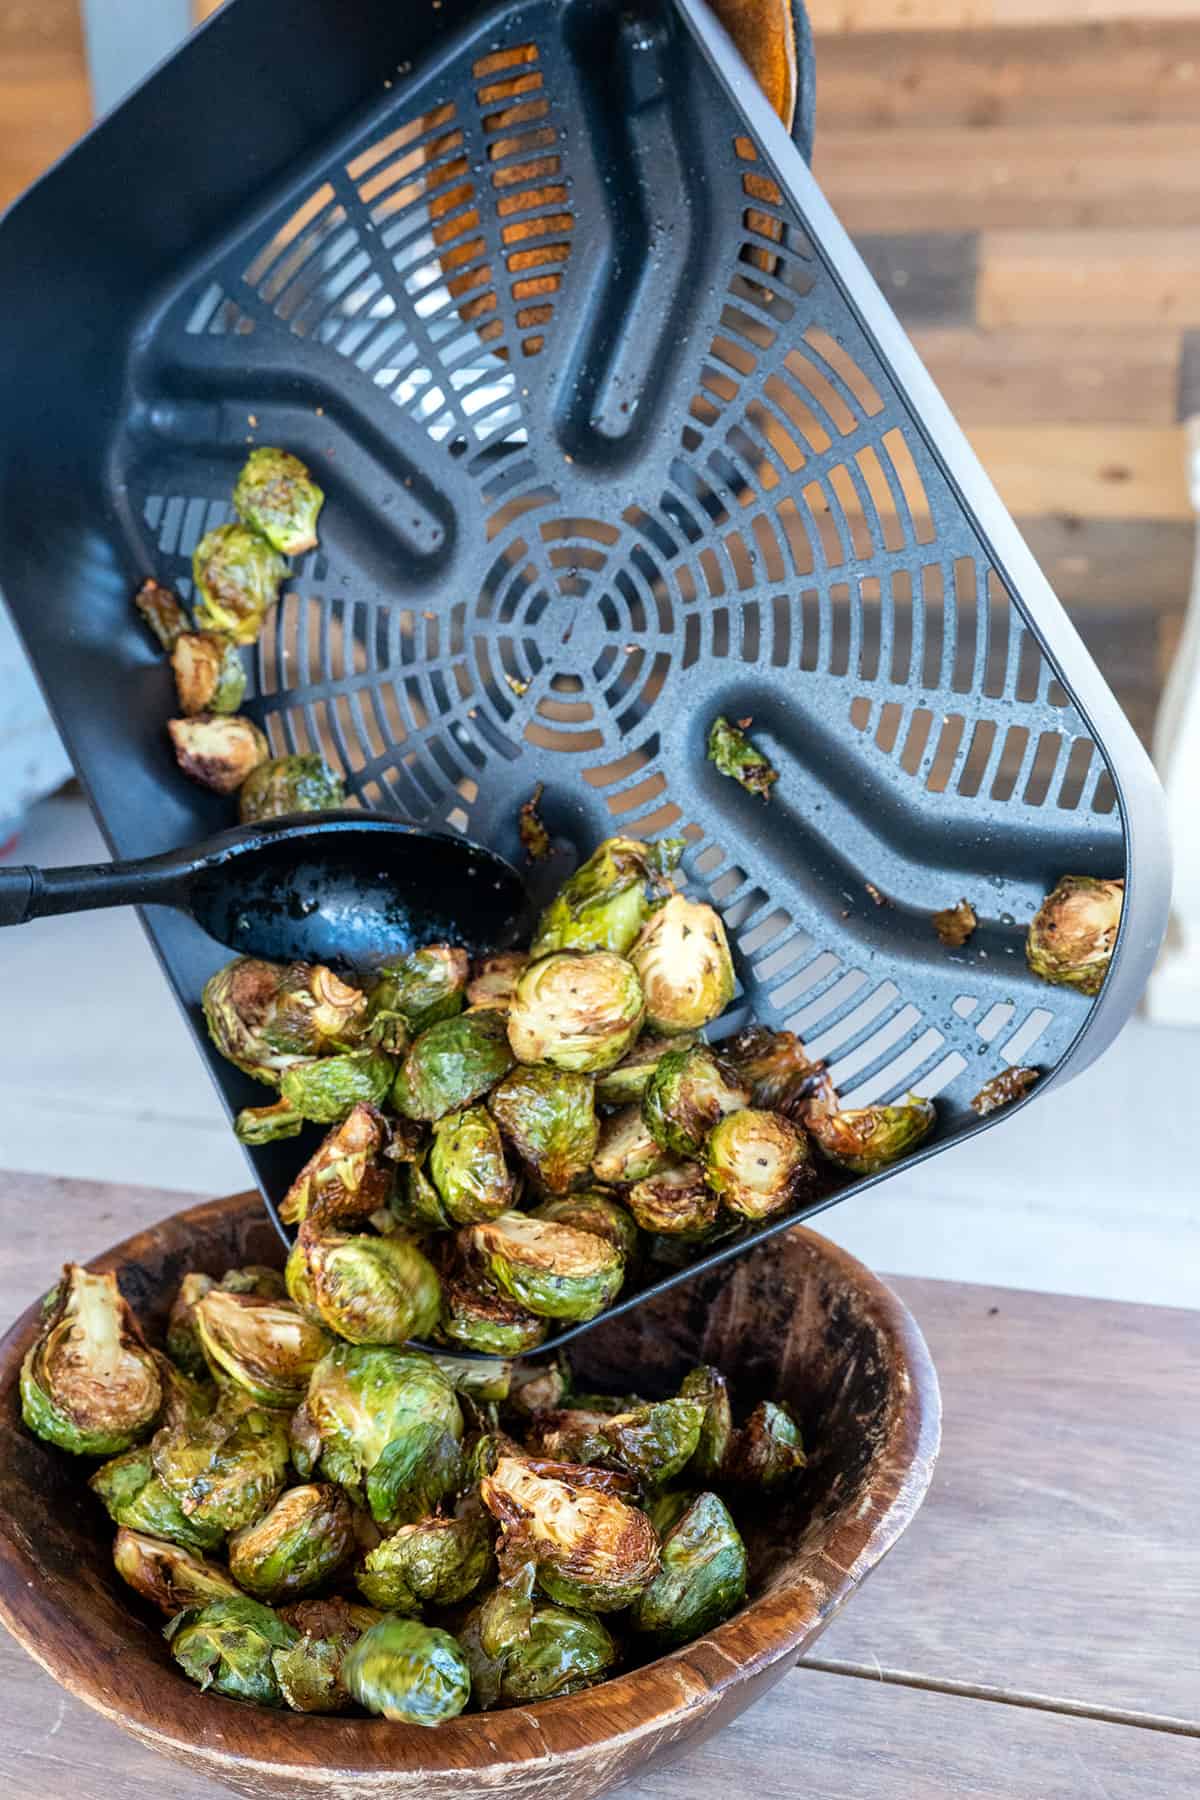 Dumping brussels sprouts from air crisper basket to bowl.